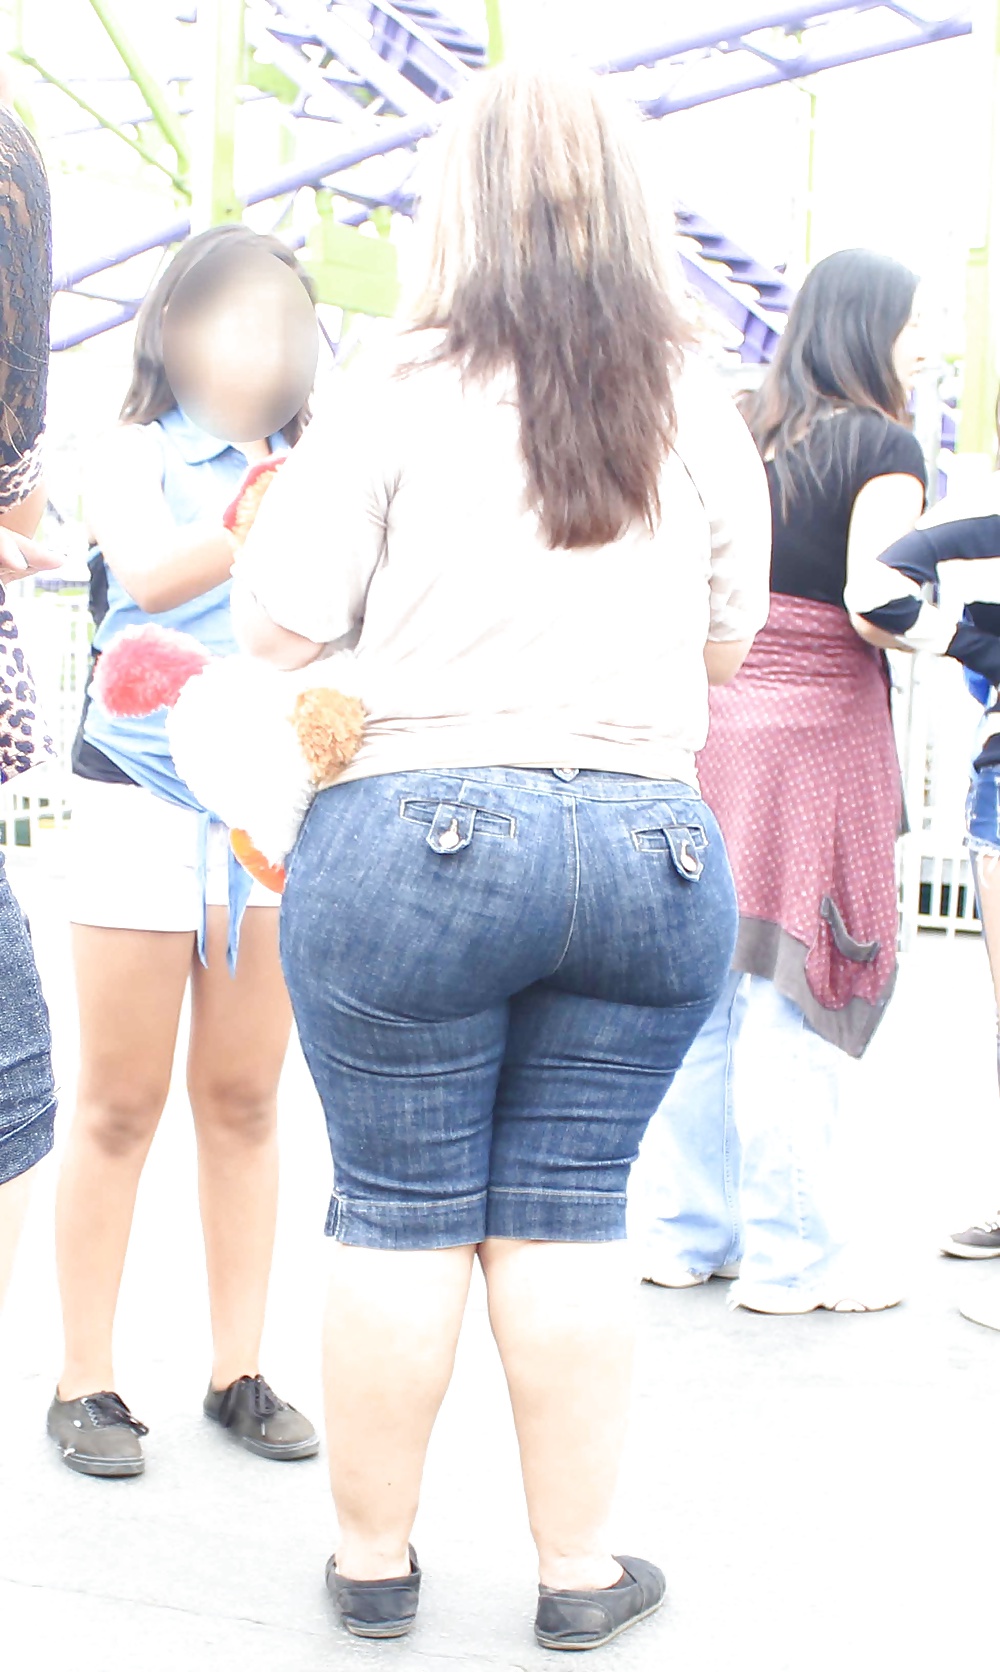 Candid Huge Latina Mom Ass in Jeans